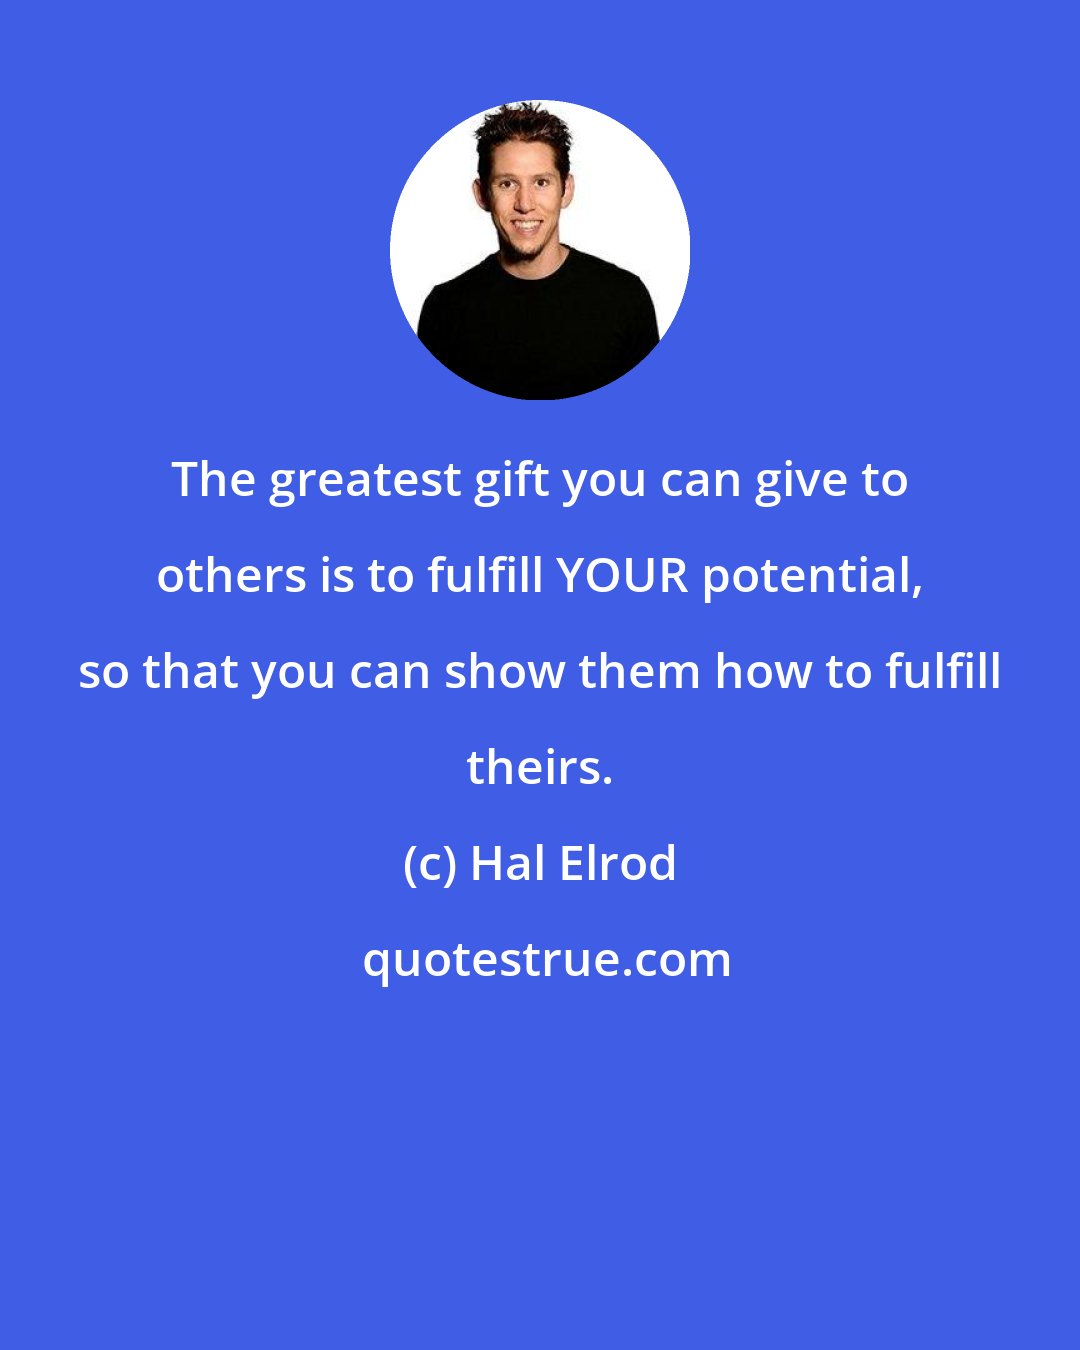 Hal Elrod: The greatest gift you can give to others is to fulfill YOUR potential, so that you can show them how to fulfill theirs.